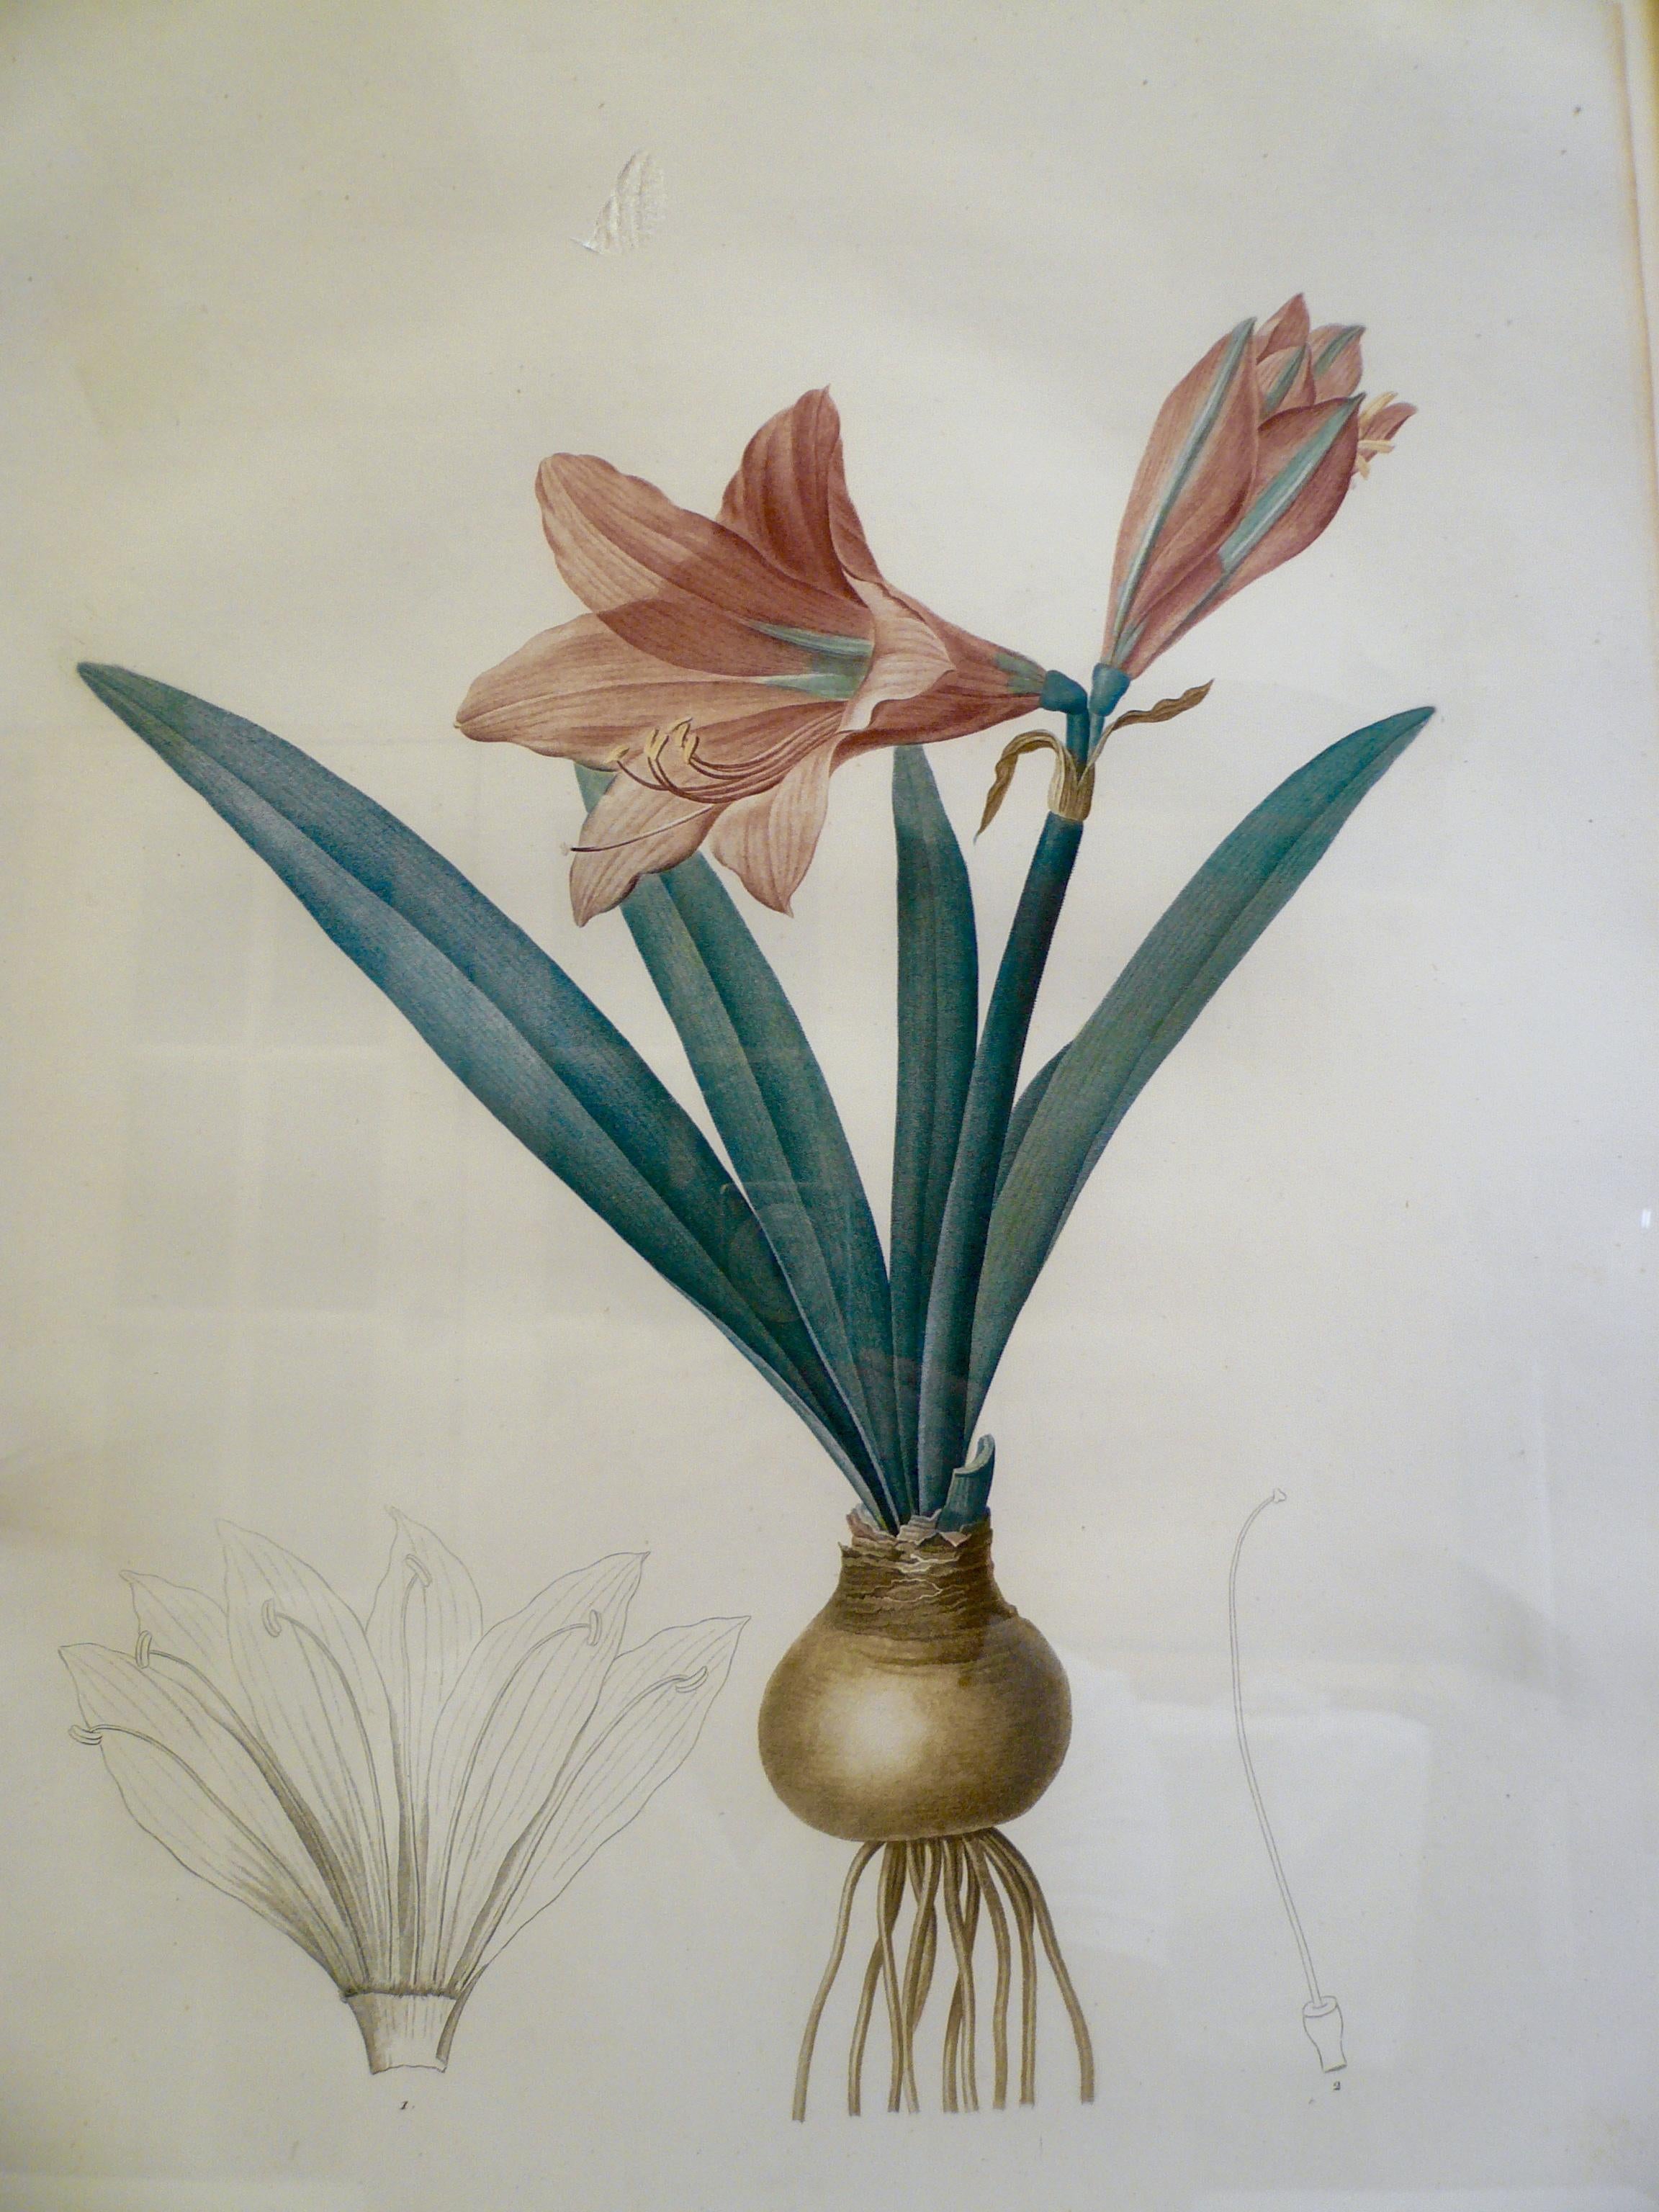 Empire Four Botanical Engravings by Pierre Joseph Redoute